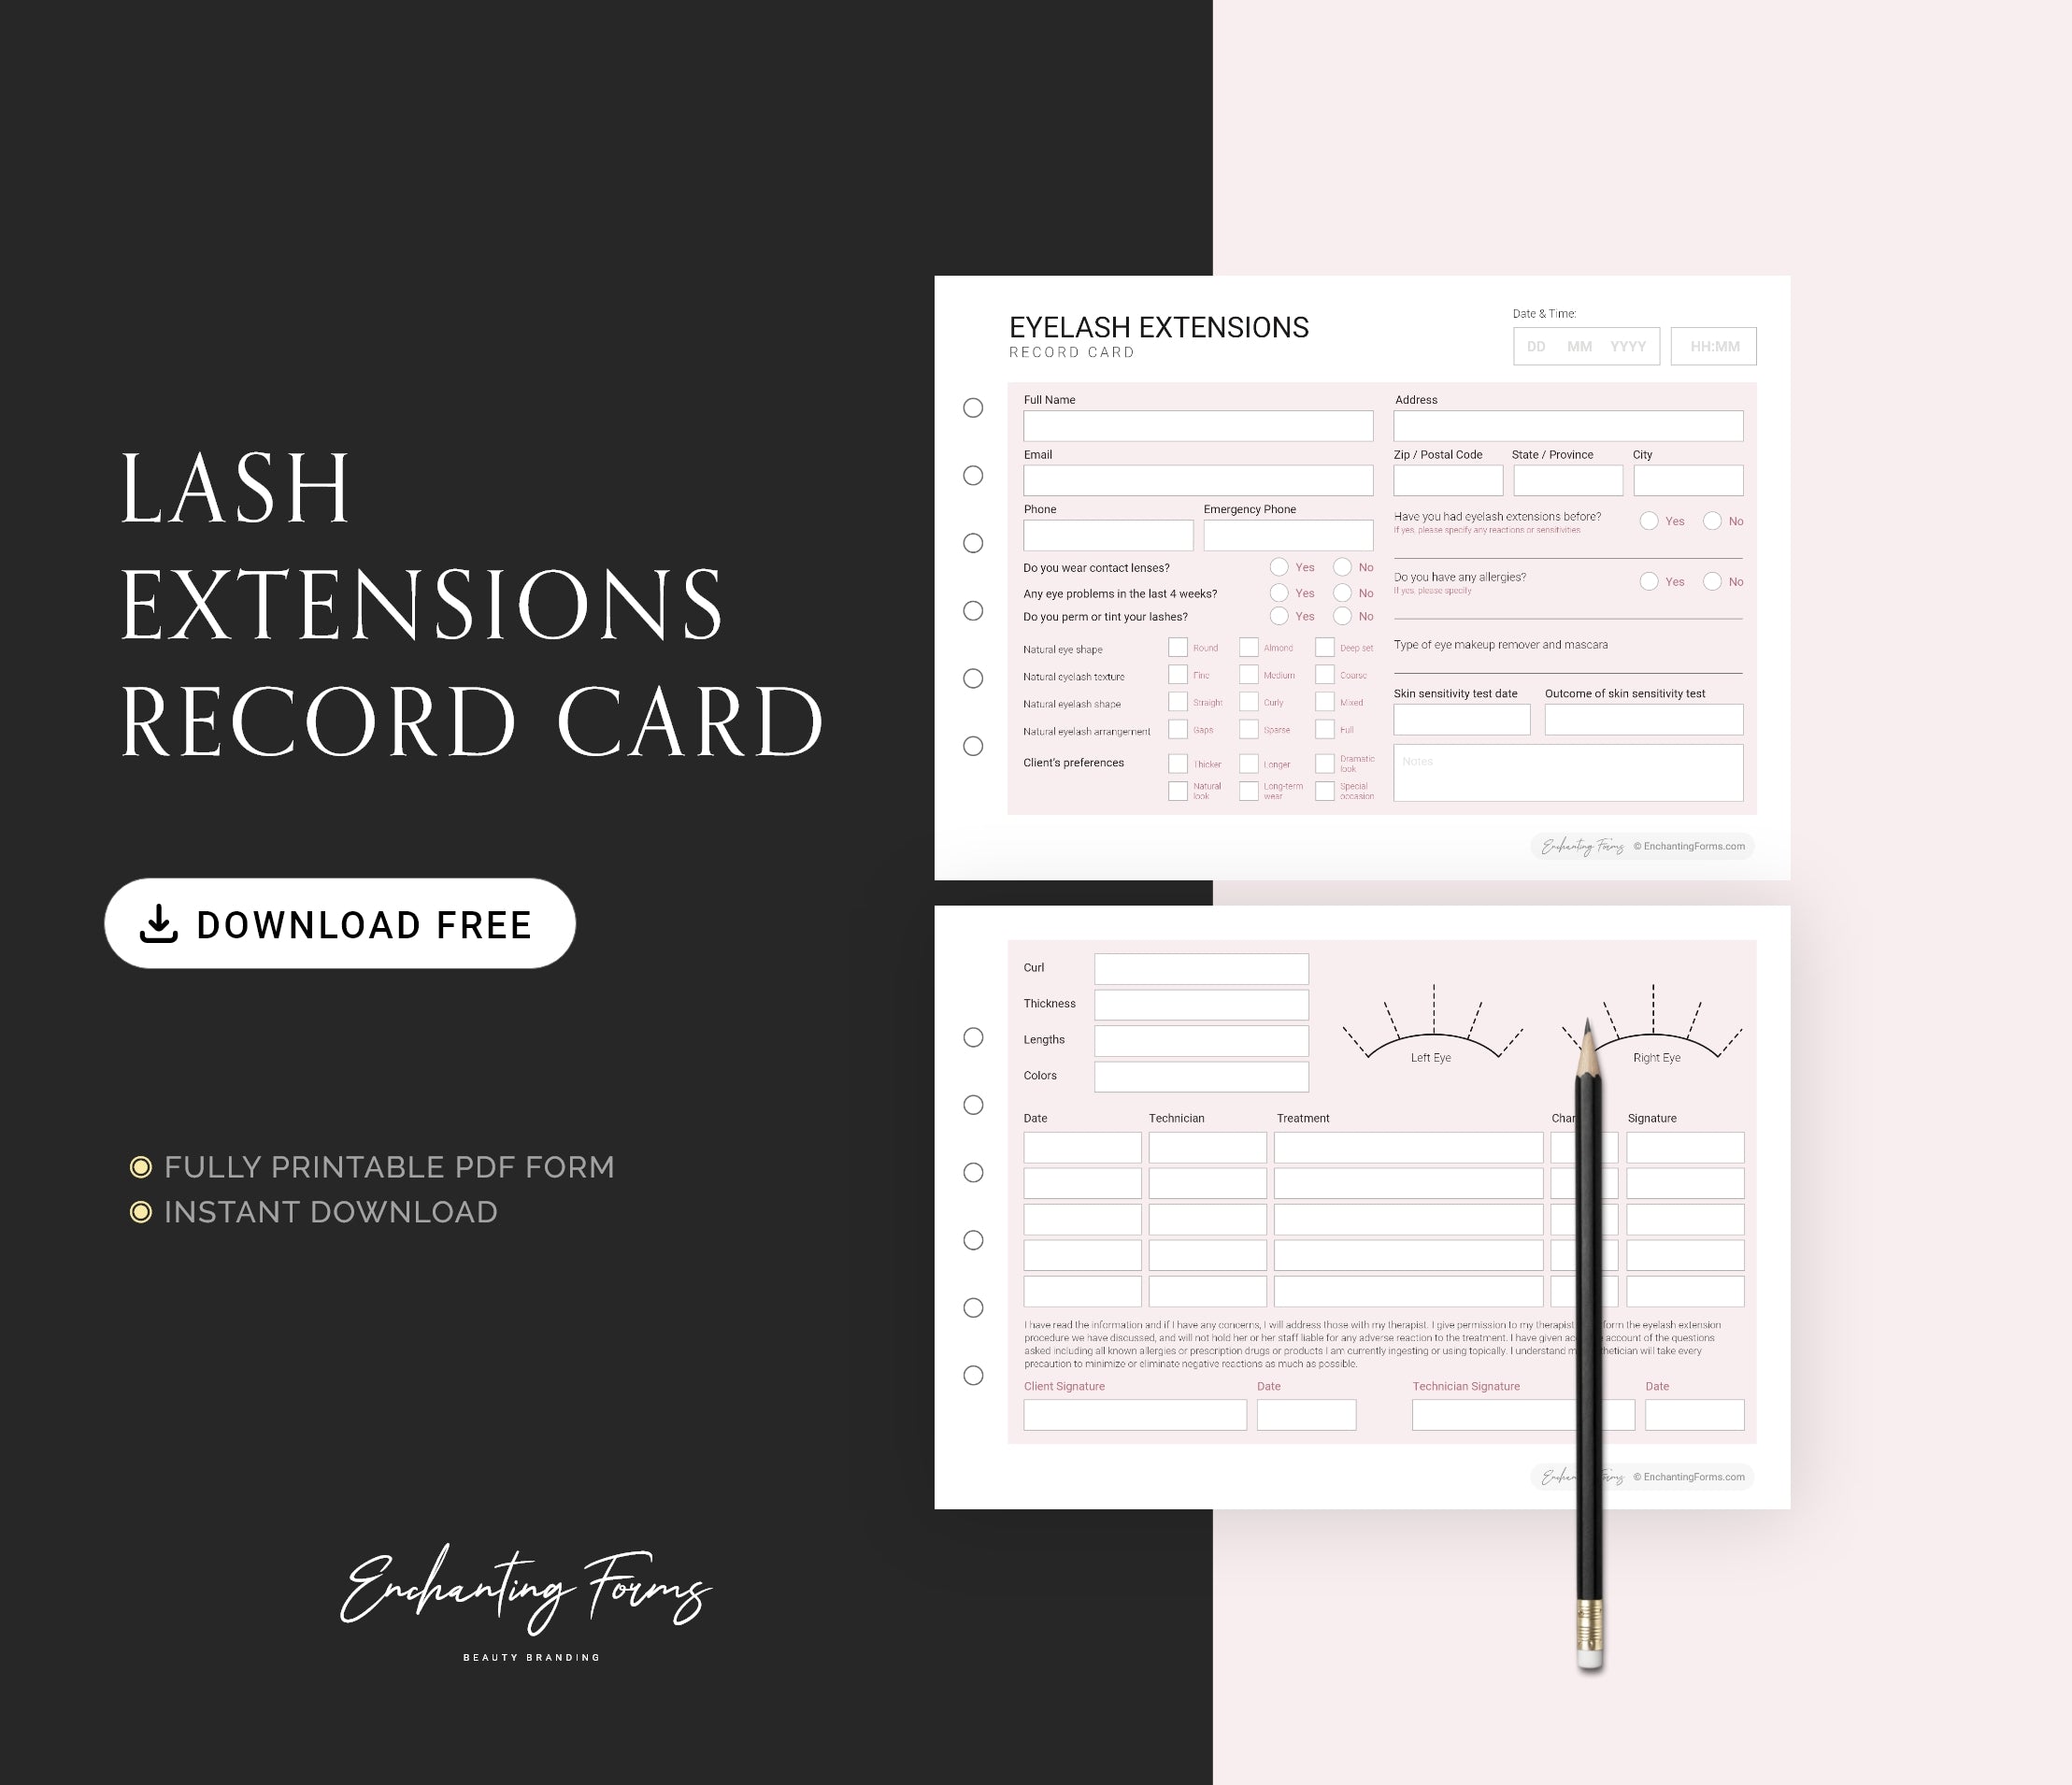 Lash Extensions Record Card - Free Download